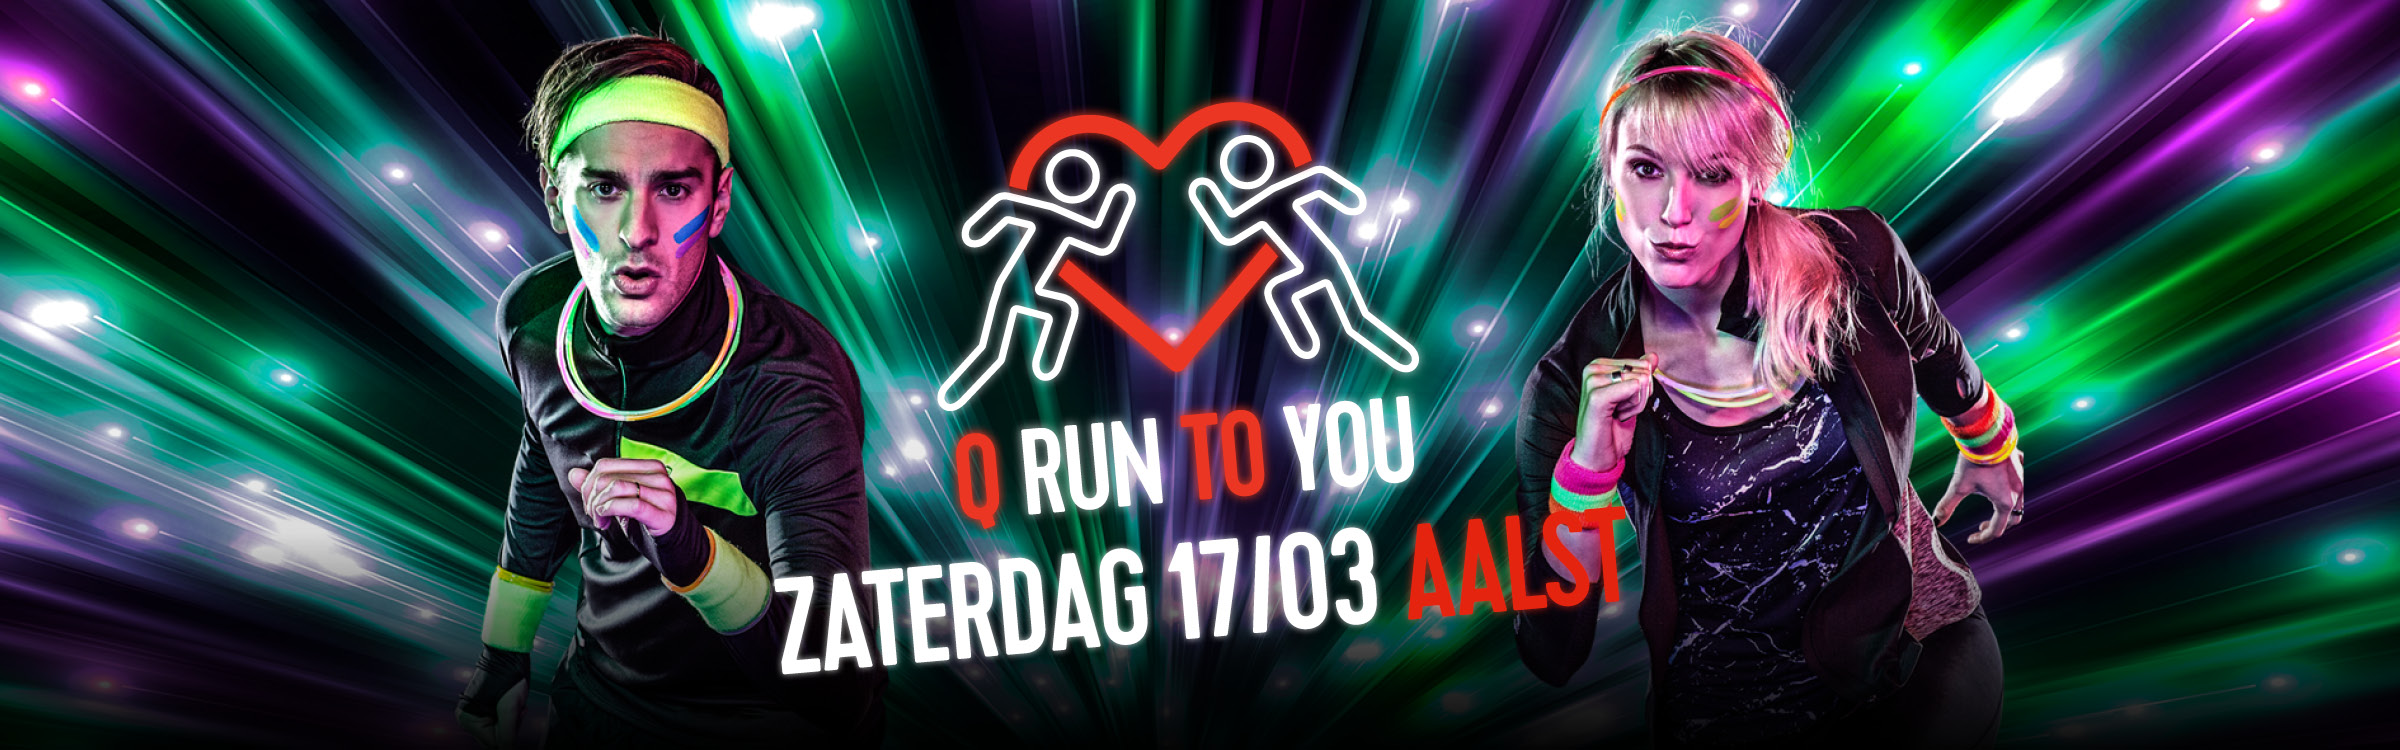 Run to you aalst header 2400x750